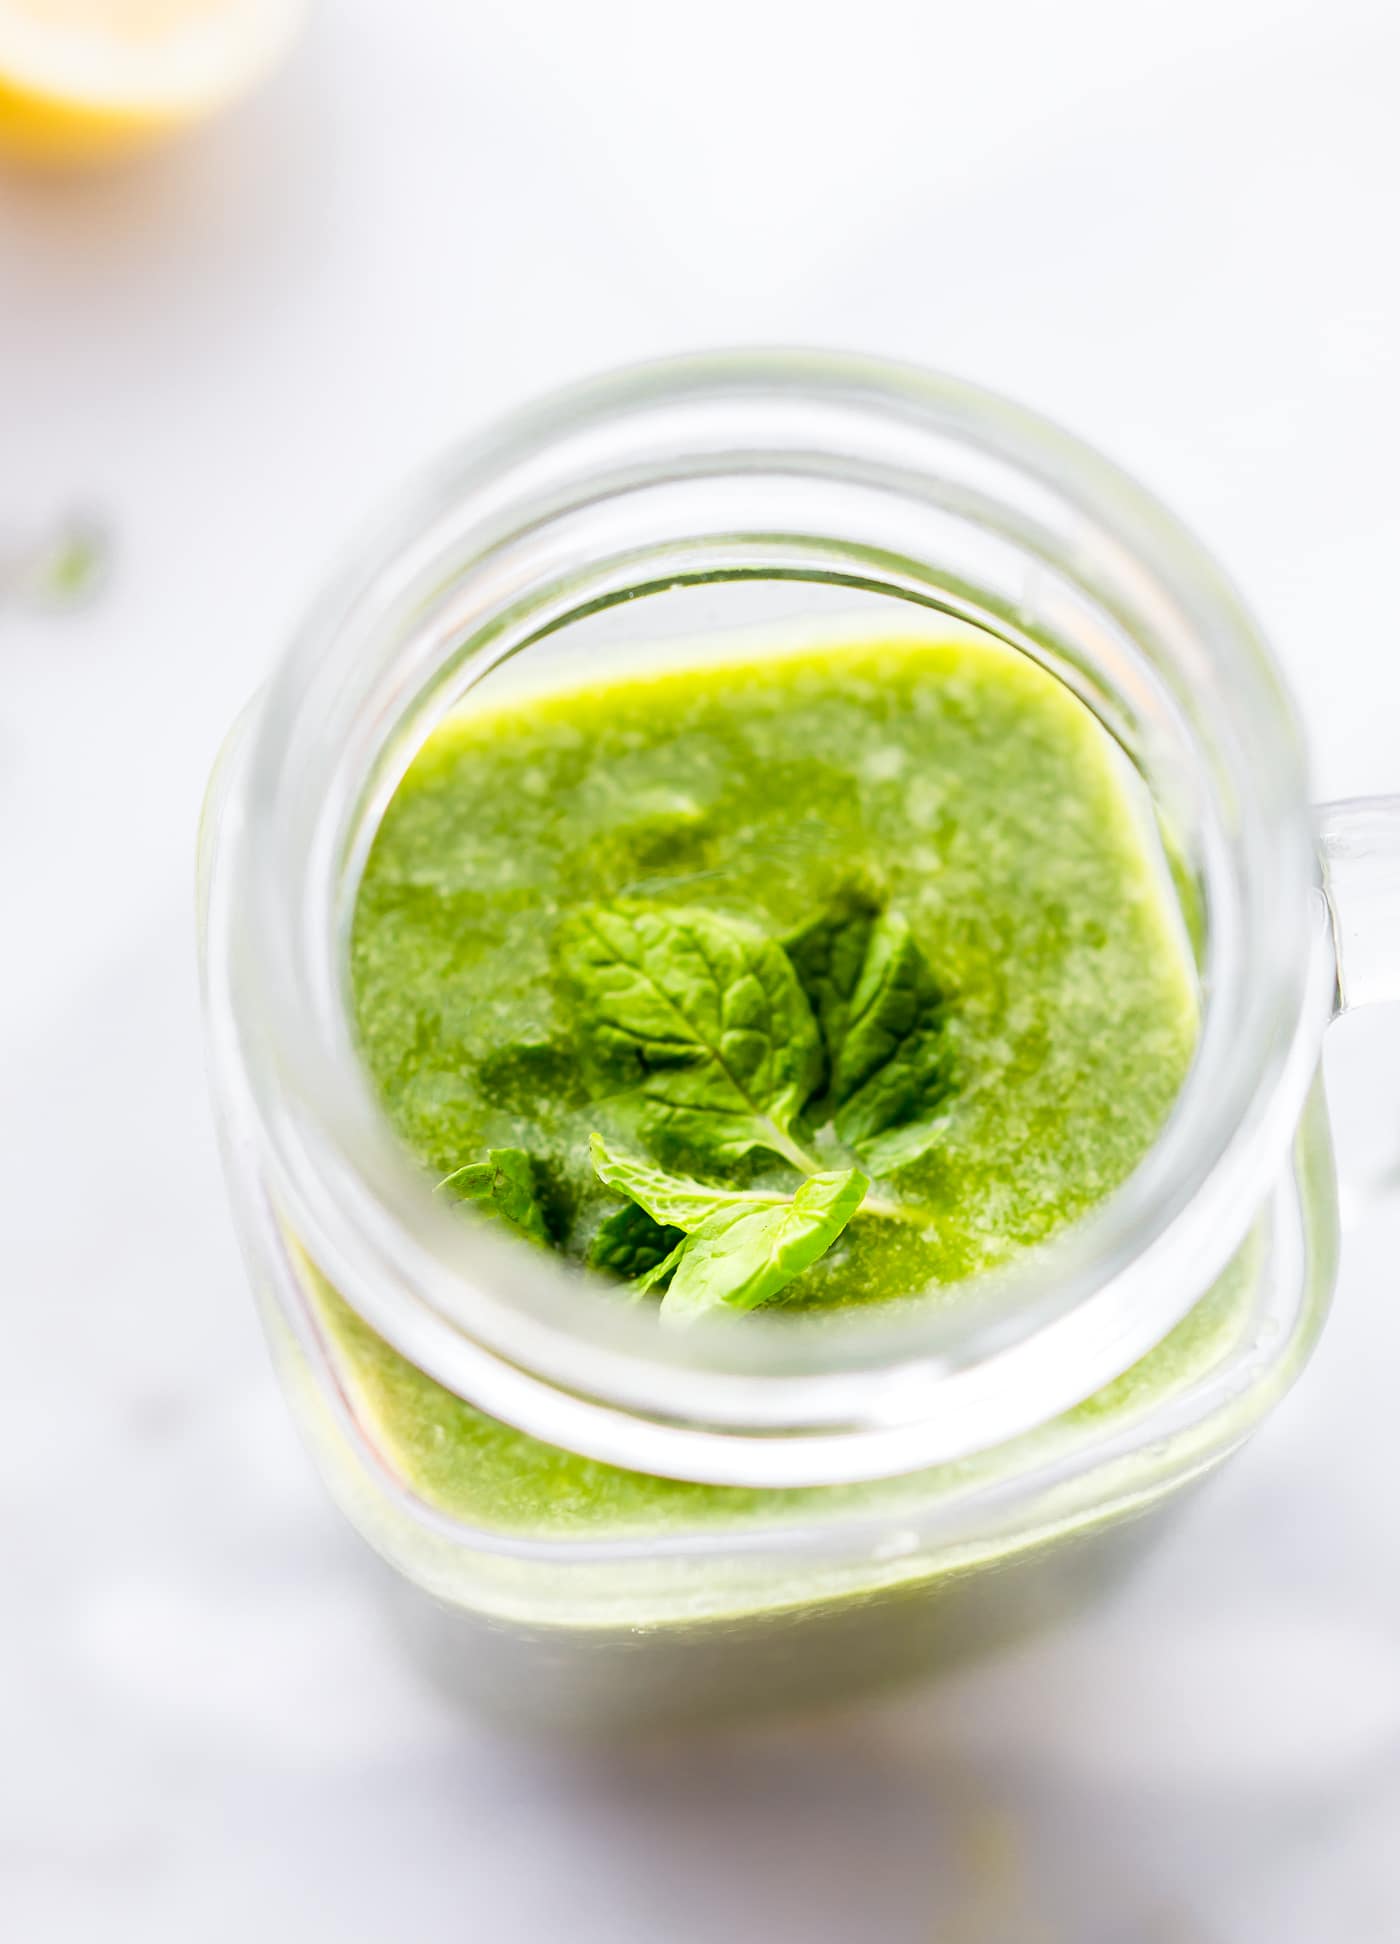 Looking into glass cup filled with green smoothie topped with sprig of mint.